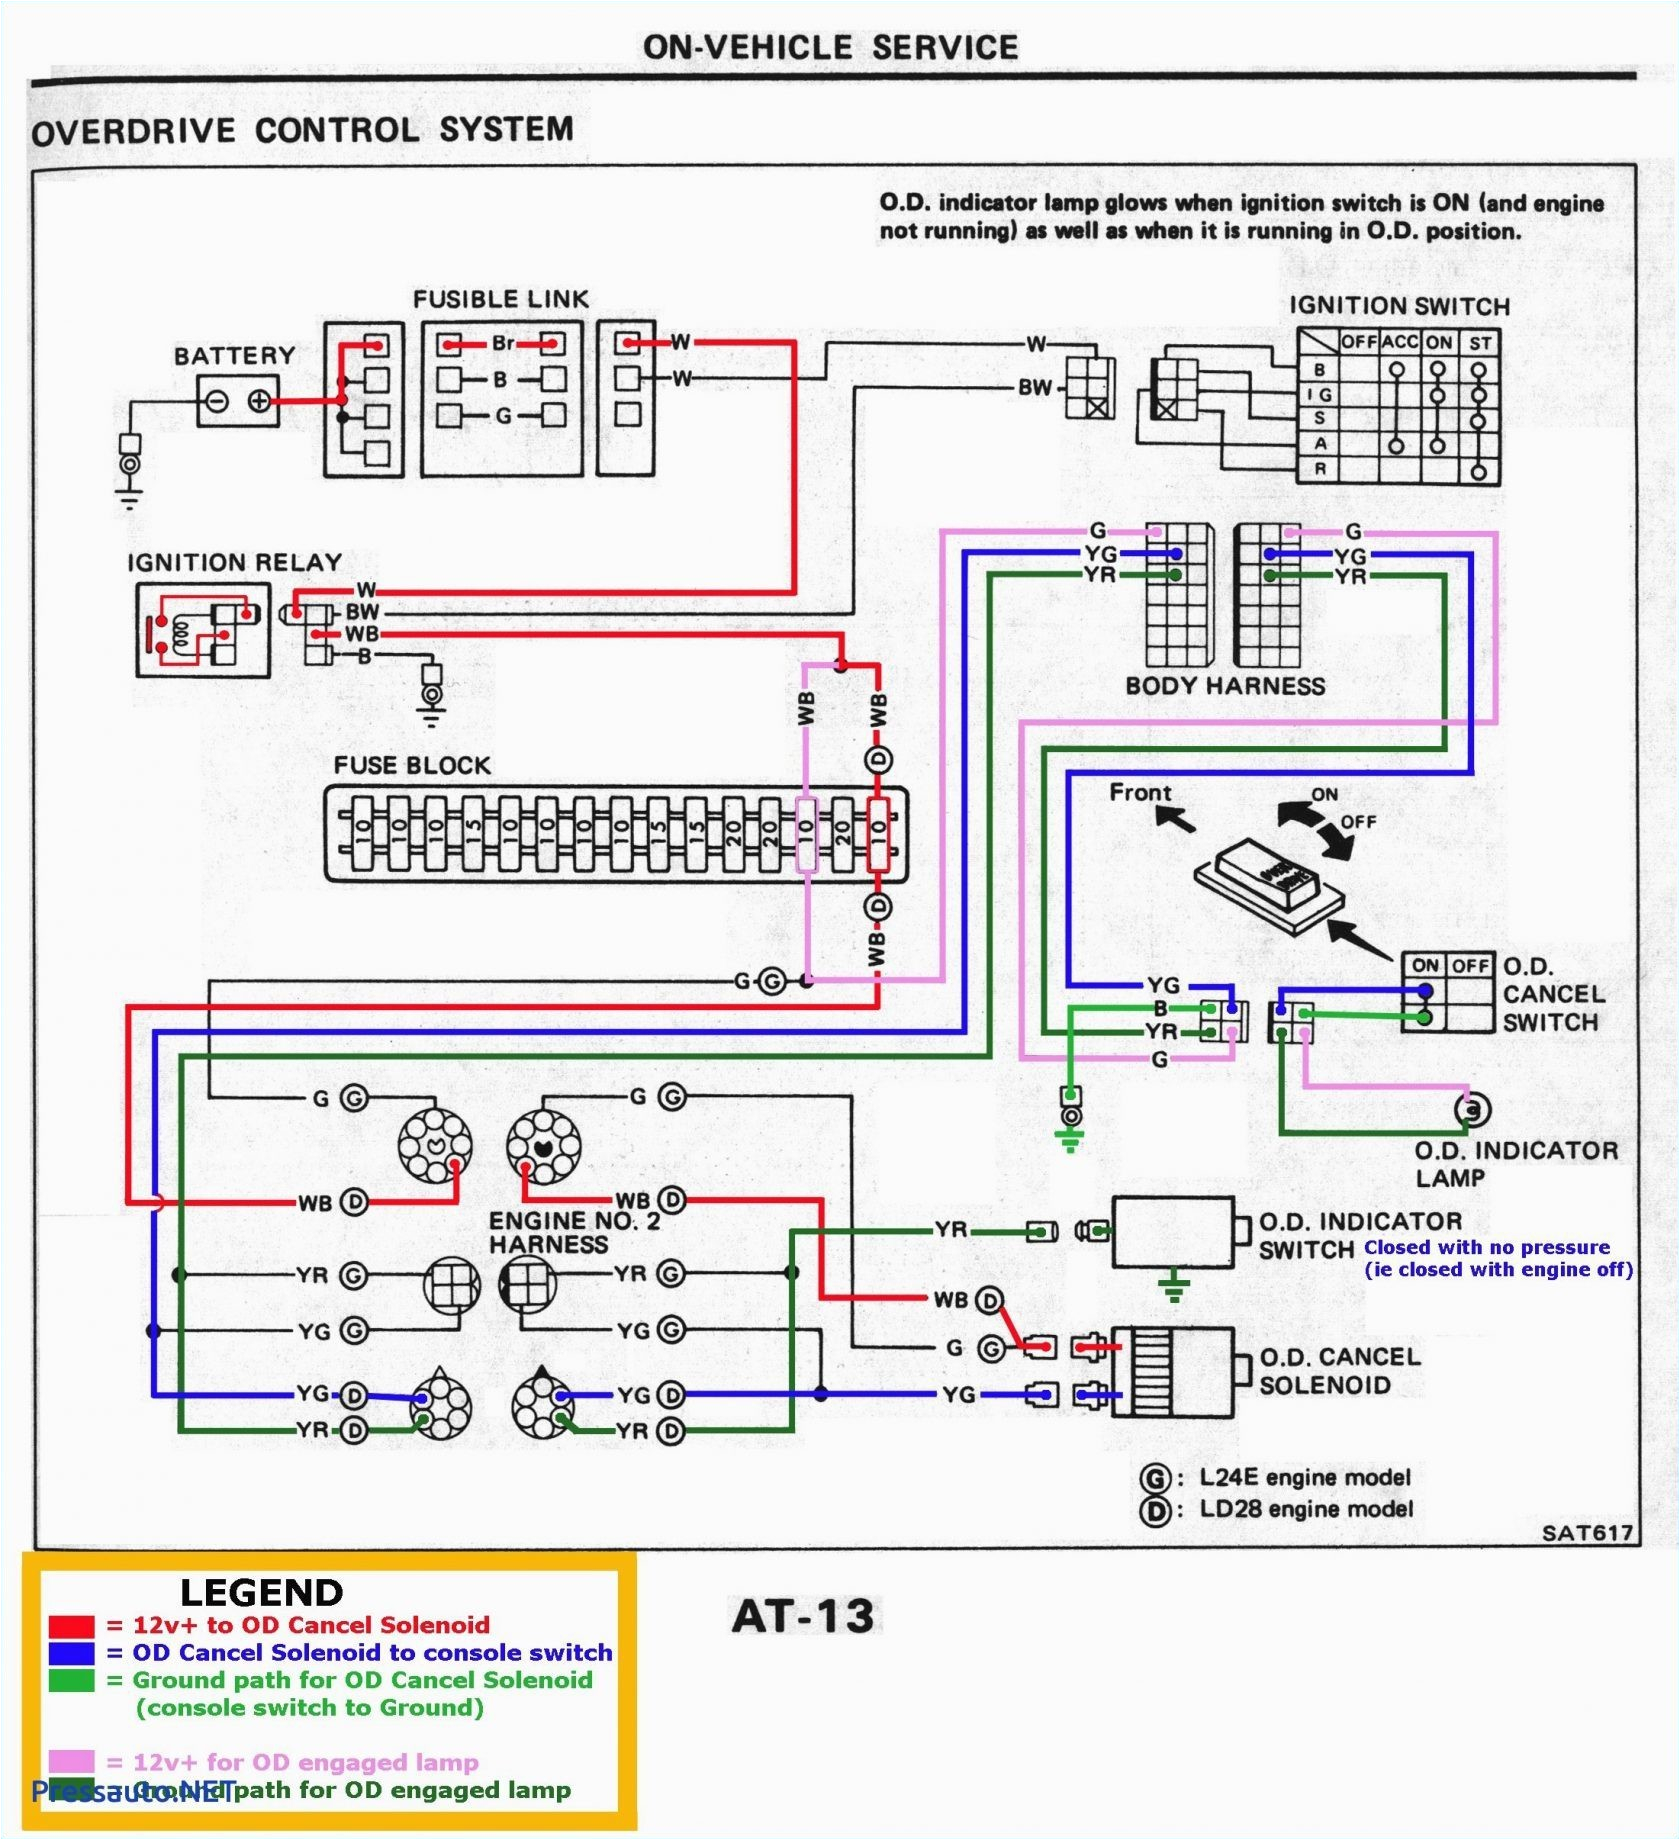 1992 jeep wrangler ignition switch wiring wiring diagram 1992 jeep wrangler ignition switch wiring